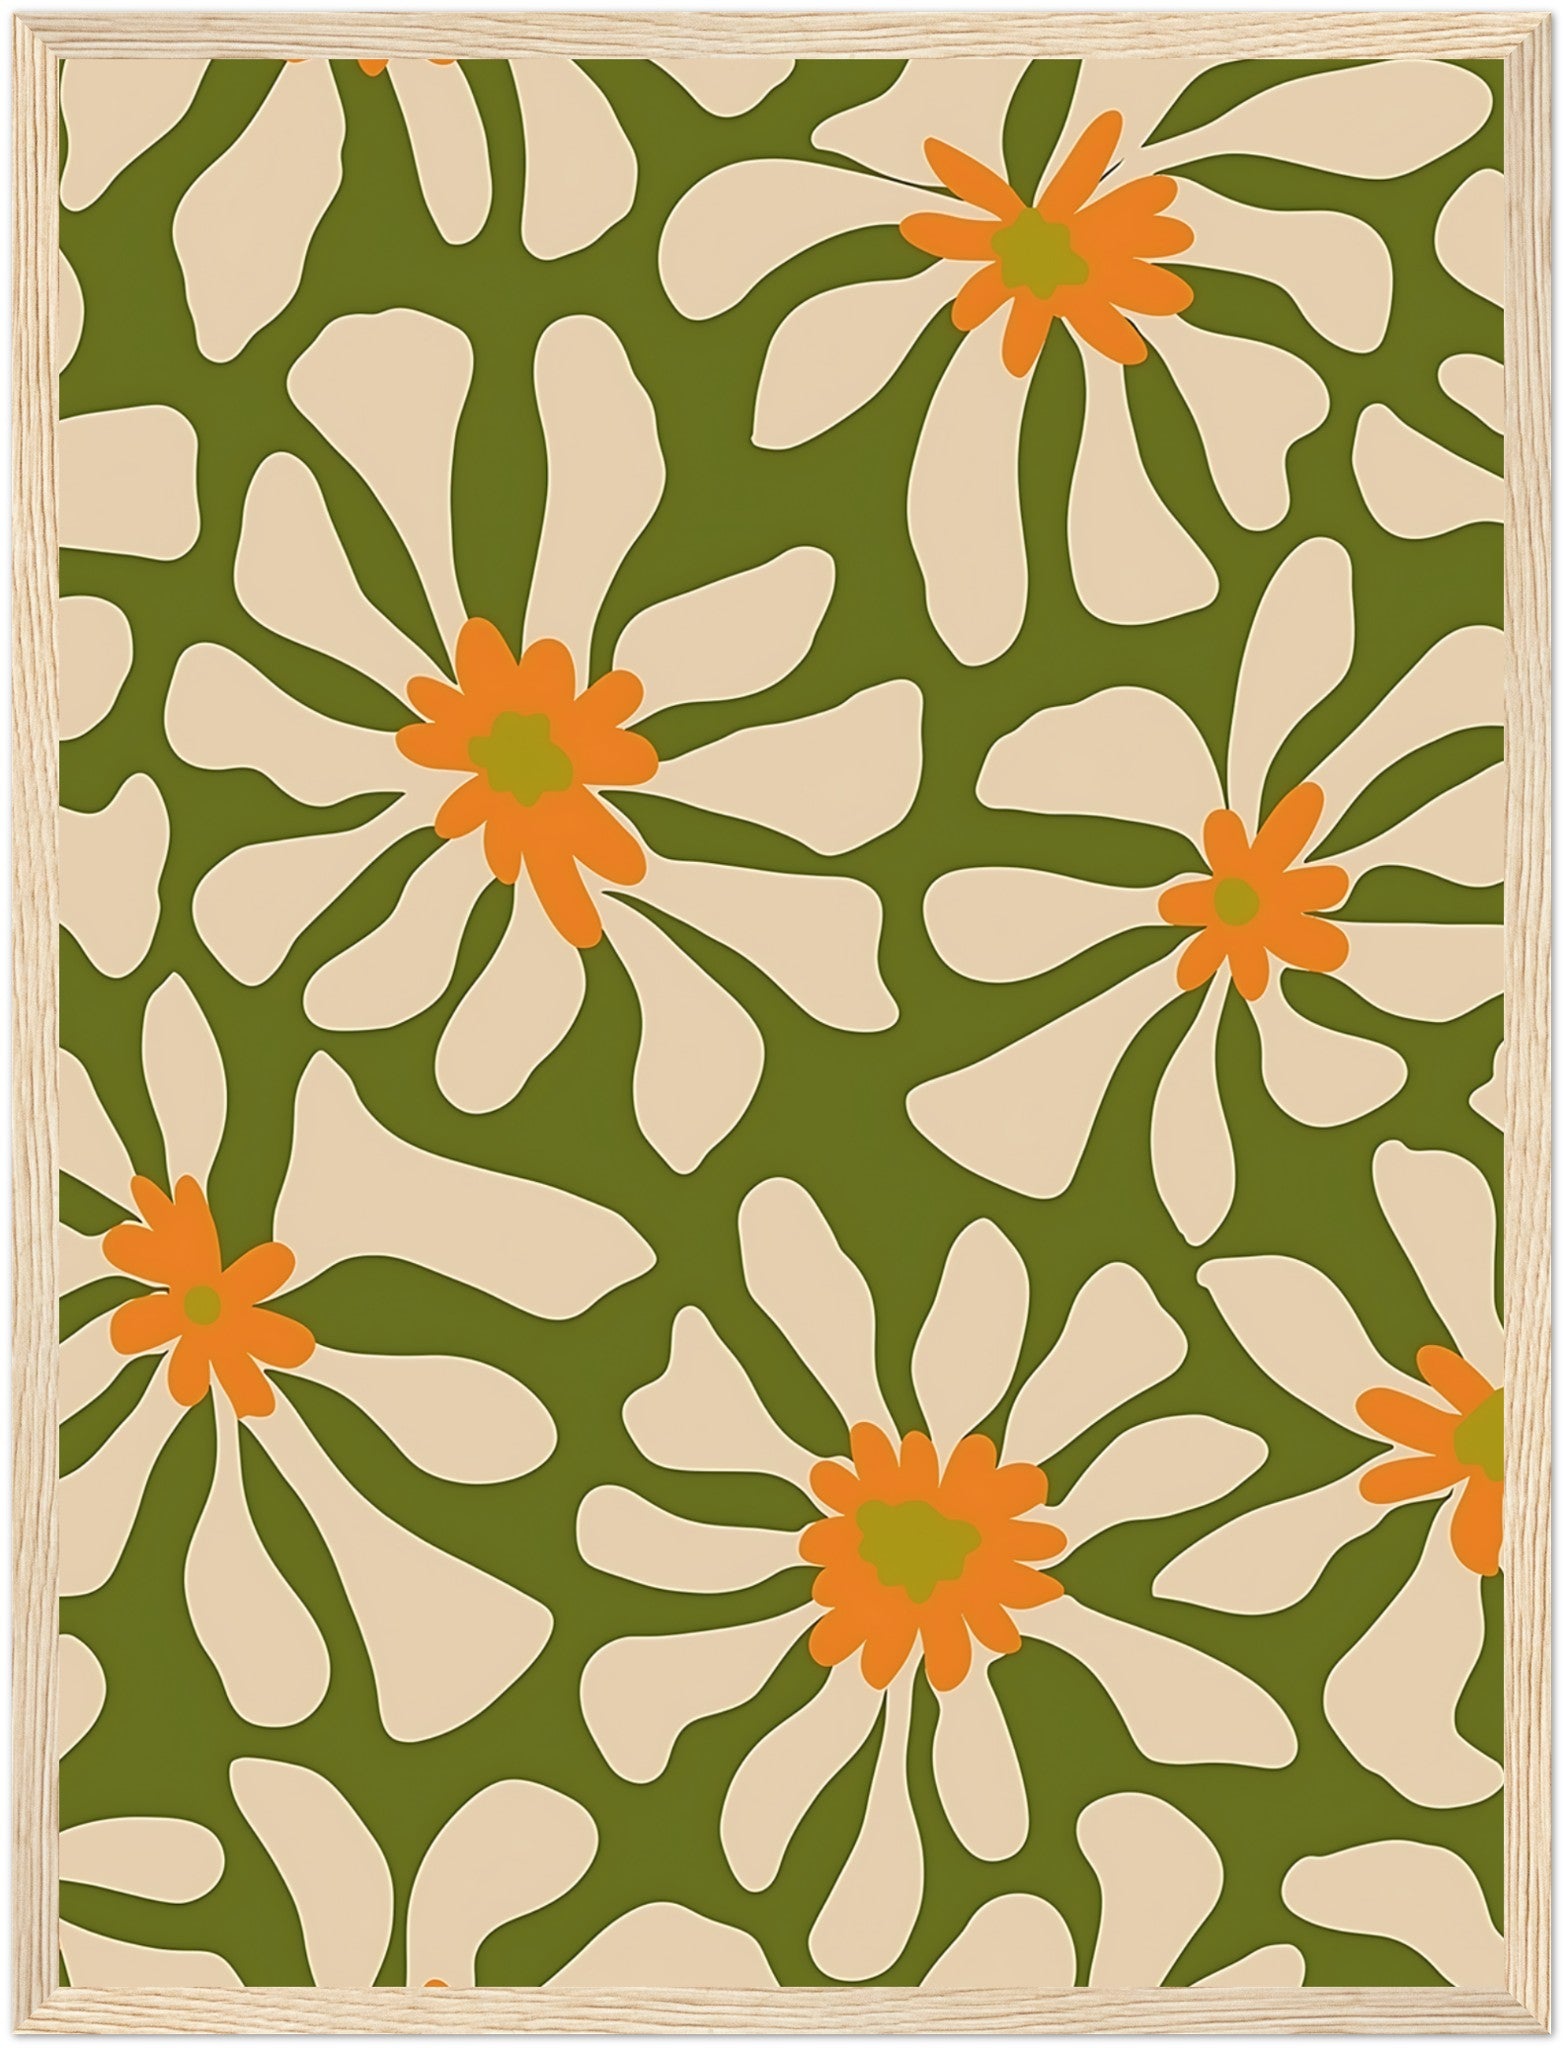 A floral pattern with white flowers and orange centers on a green background, framed with brown border.